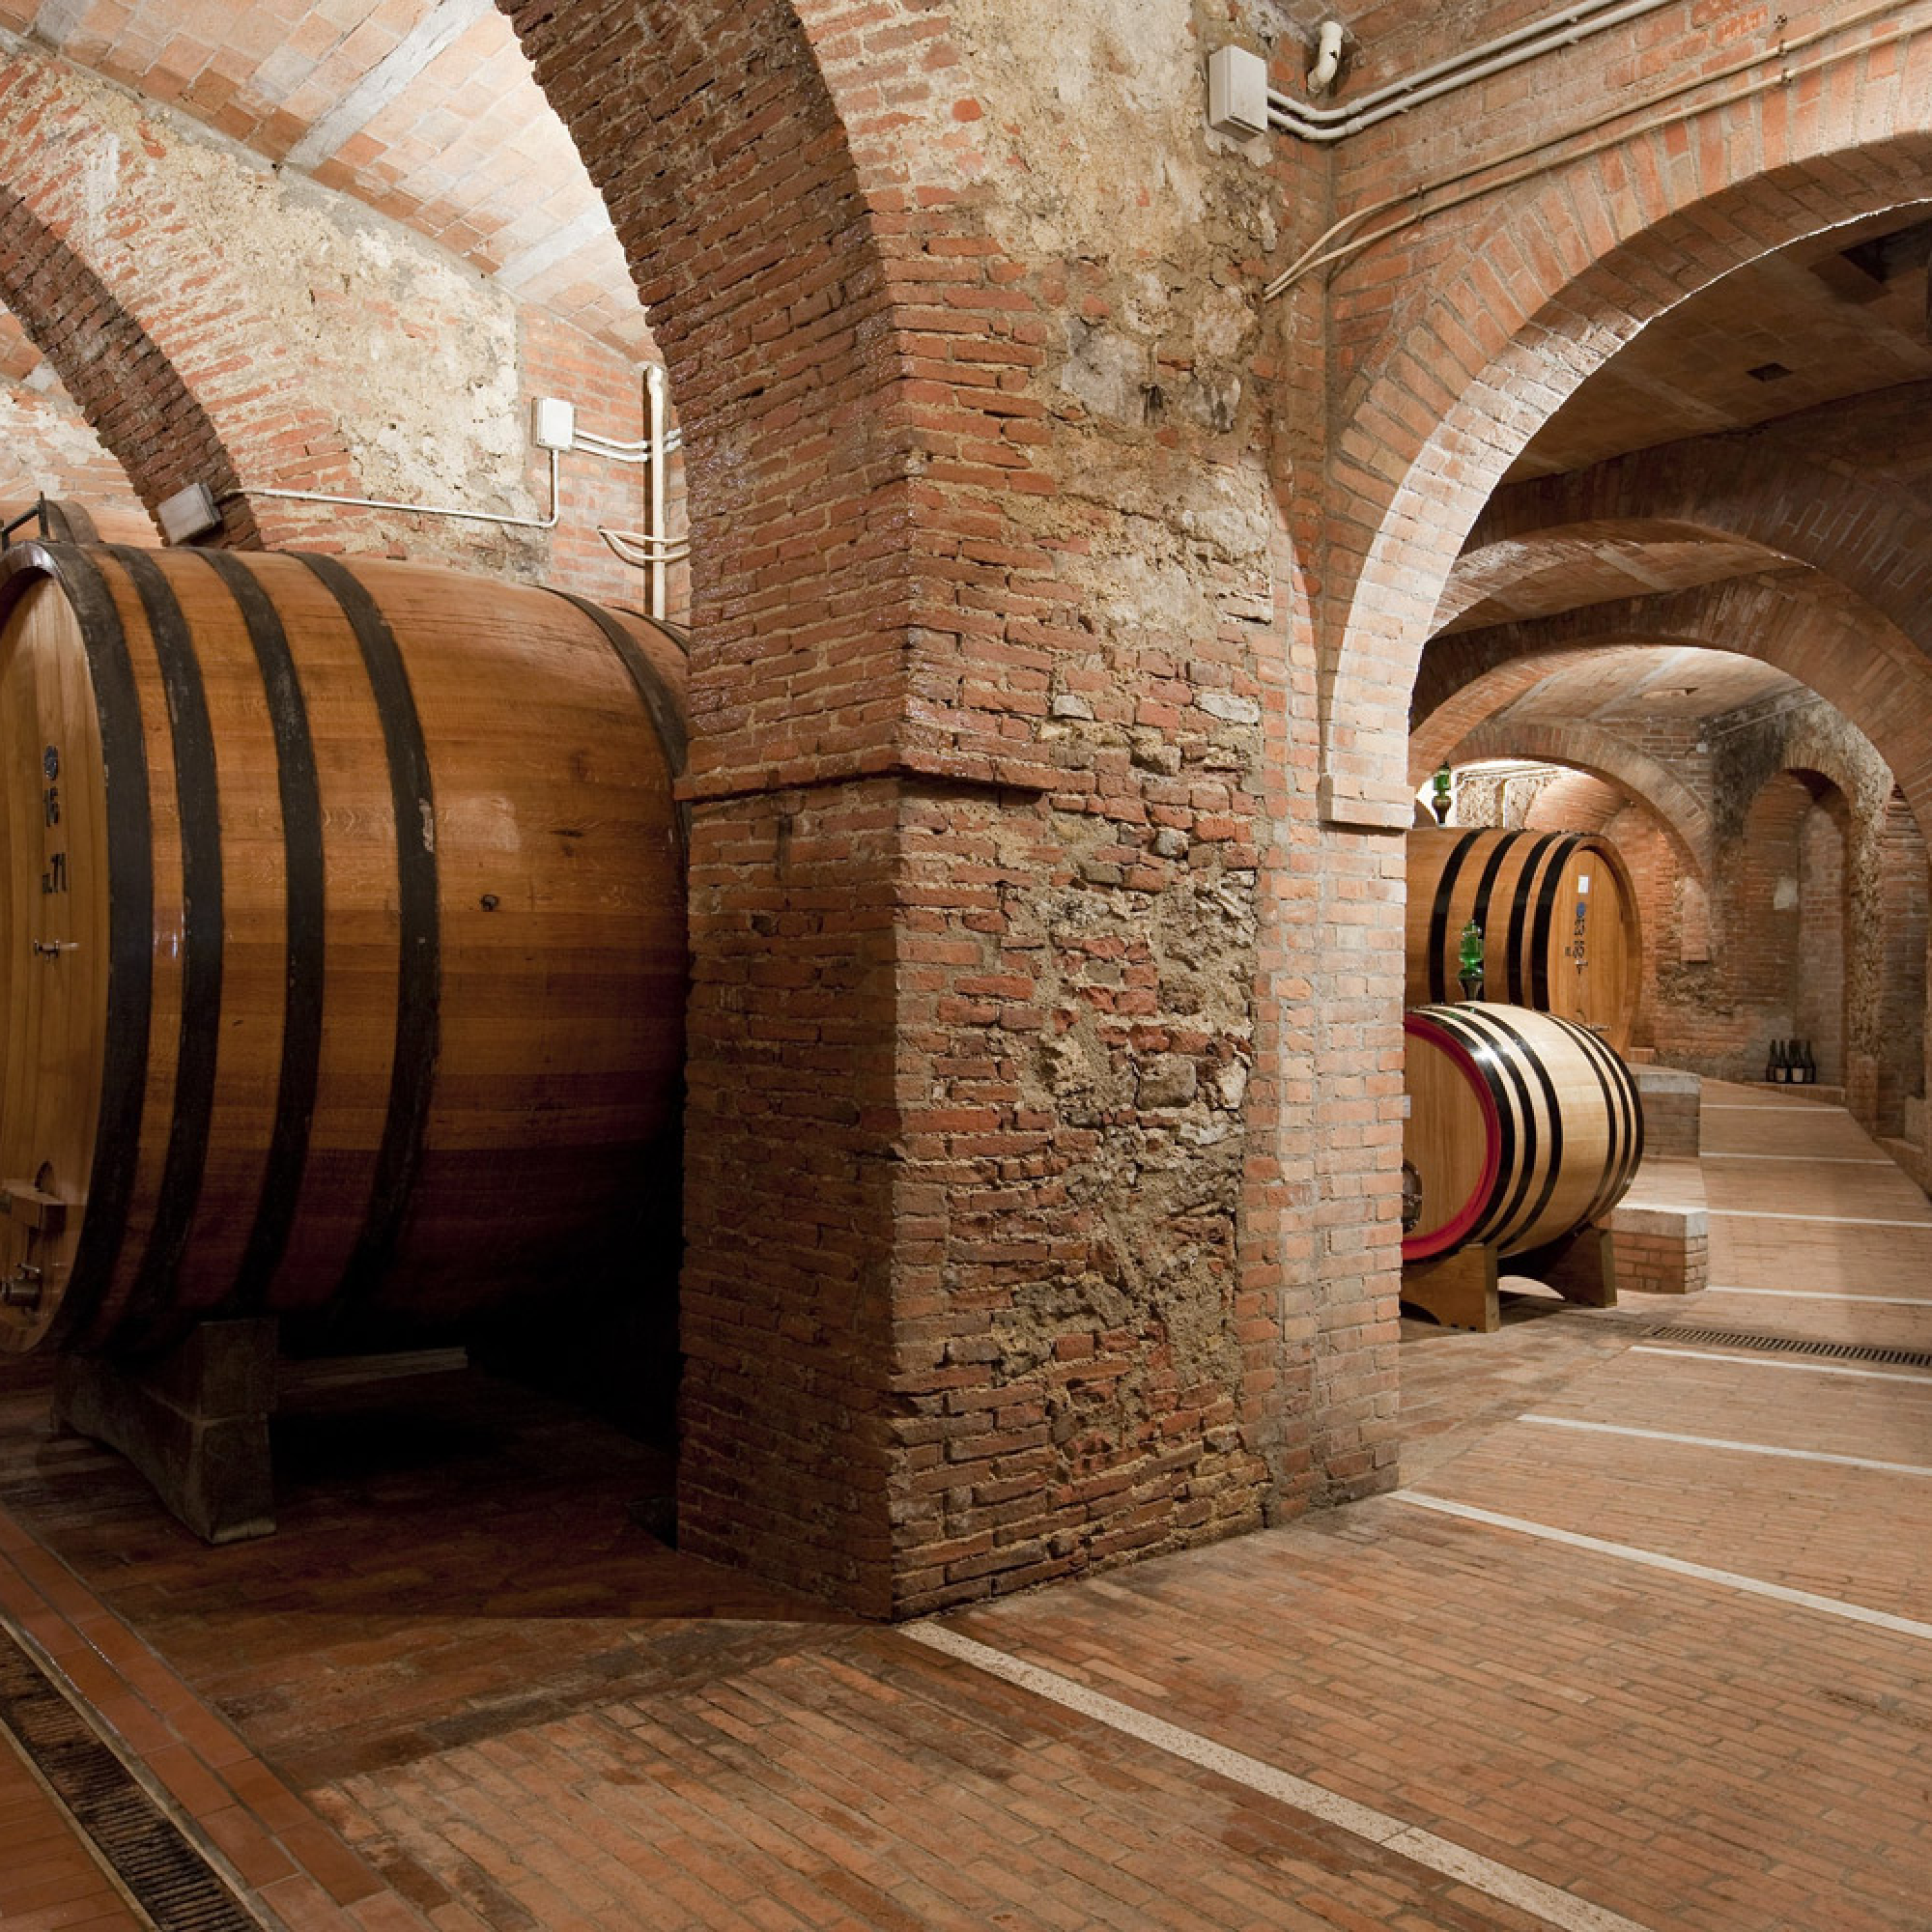 Montepulciano: Nobile Wine and the Best Cold Cuts_Box 2